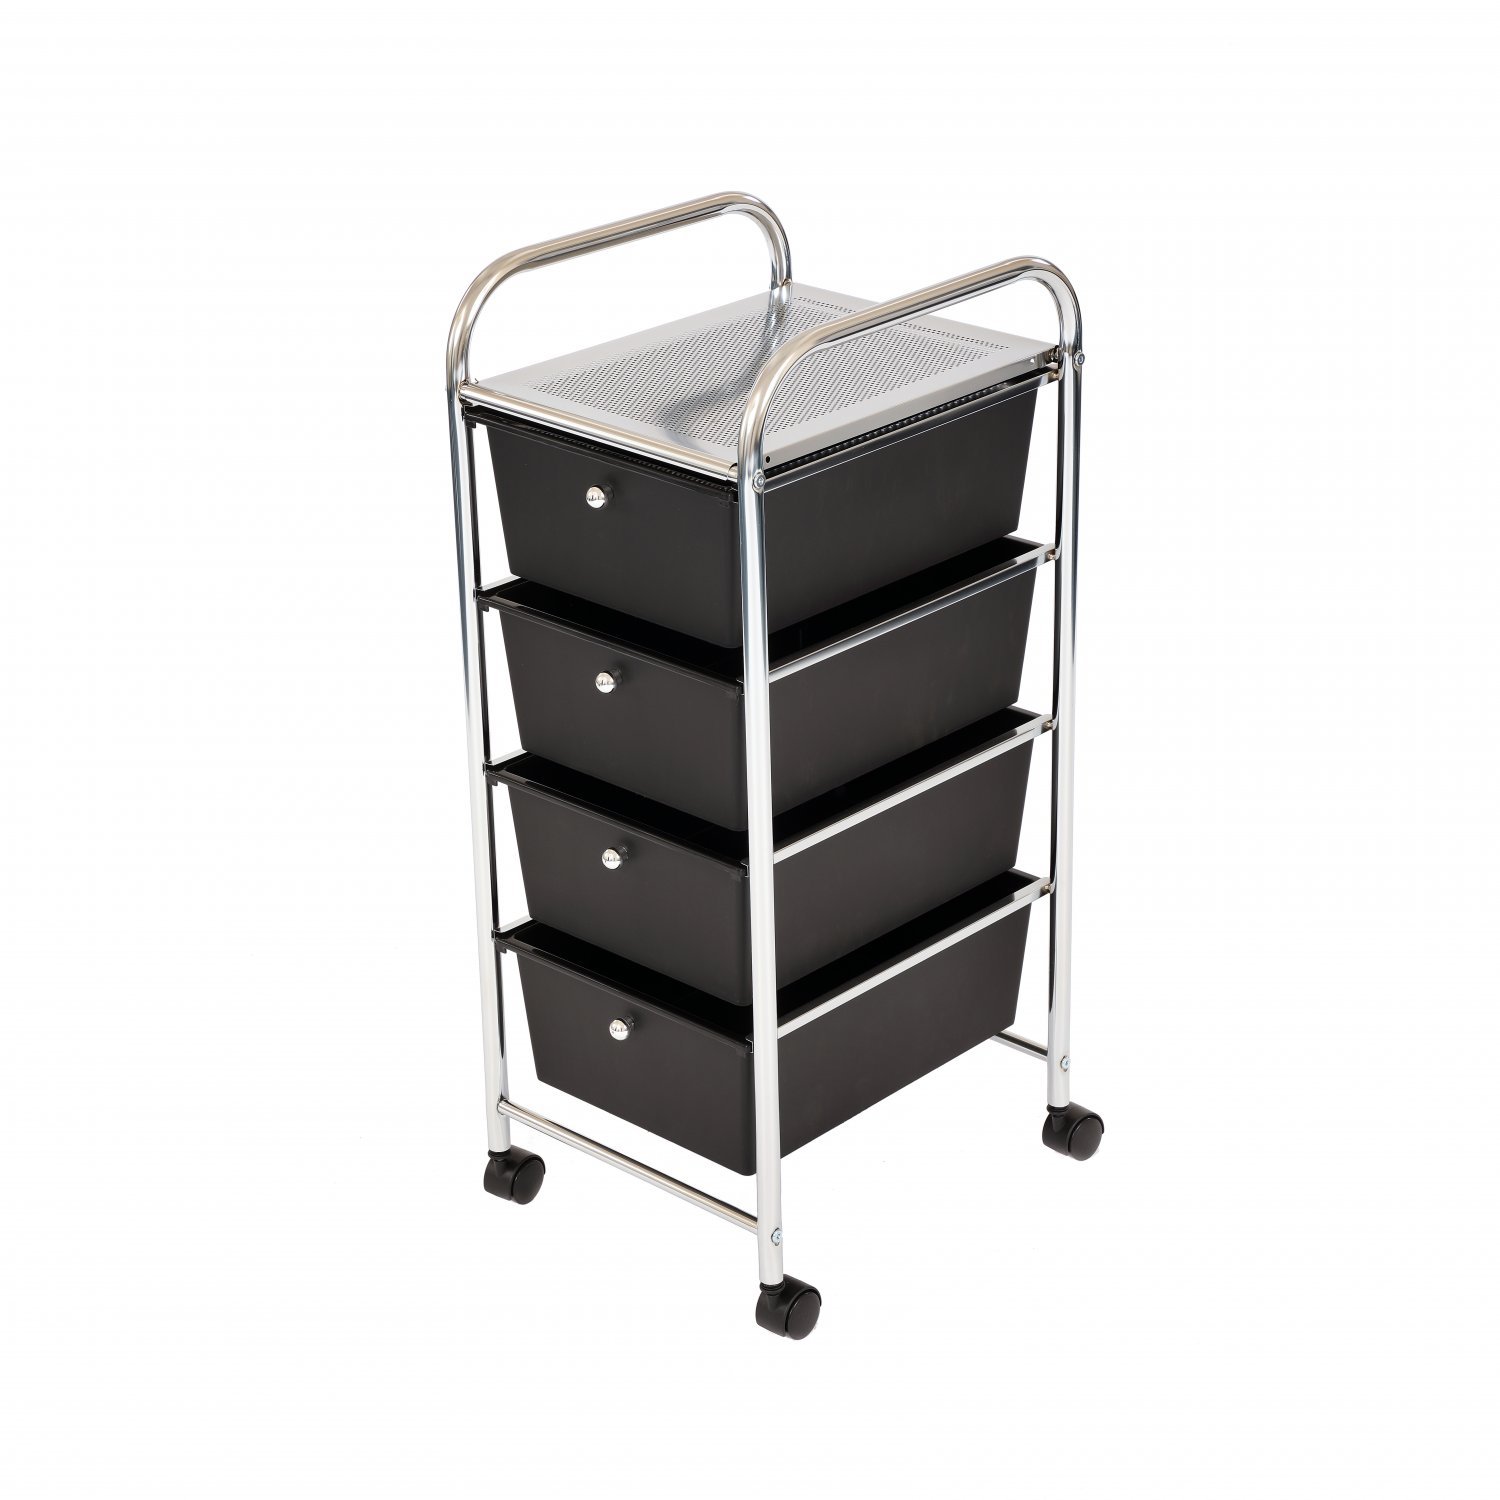 Hairdressing Beauty & Make-up Accessories Organiser with Castor Wheels YourHome 4 Drawer Mobile Storage Salon Trolley,Home Office Black Craft 